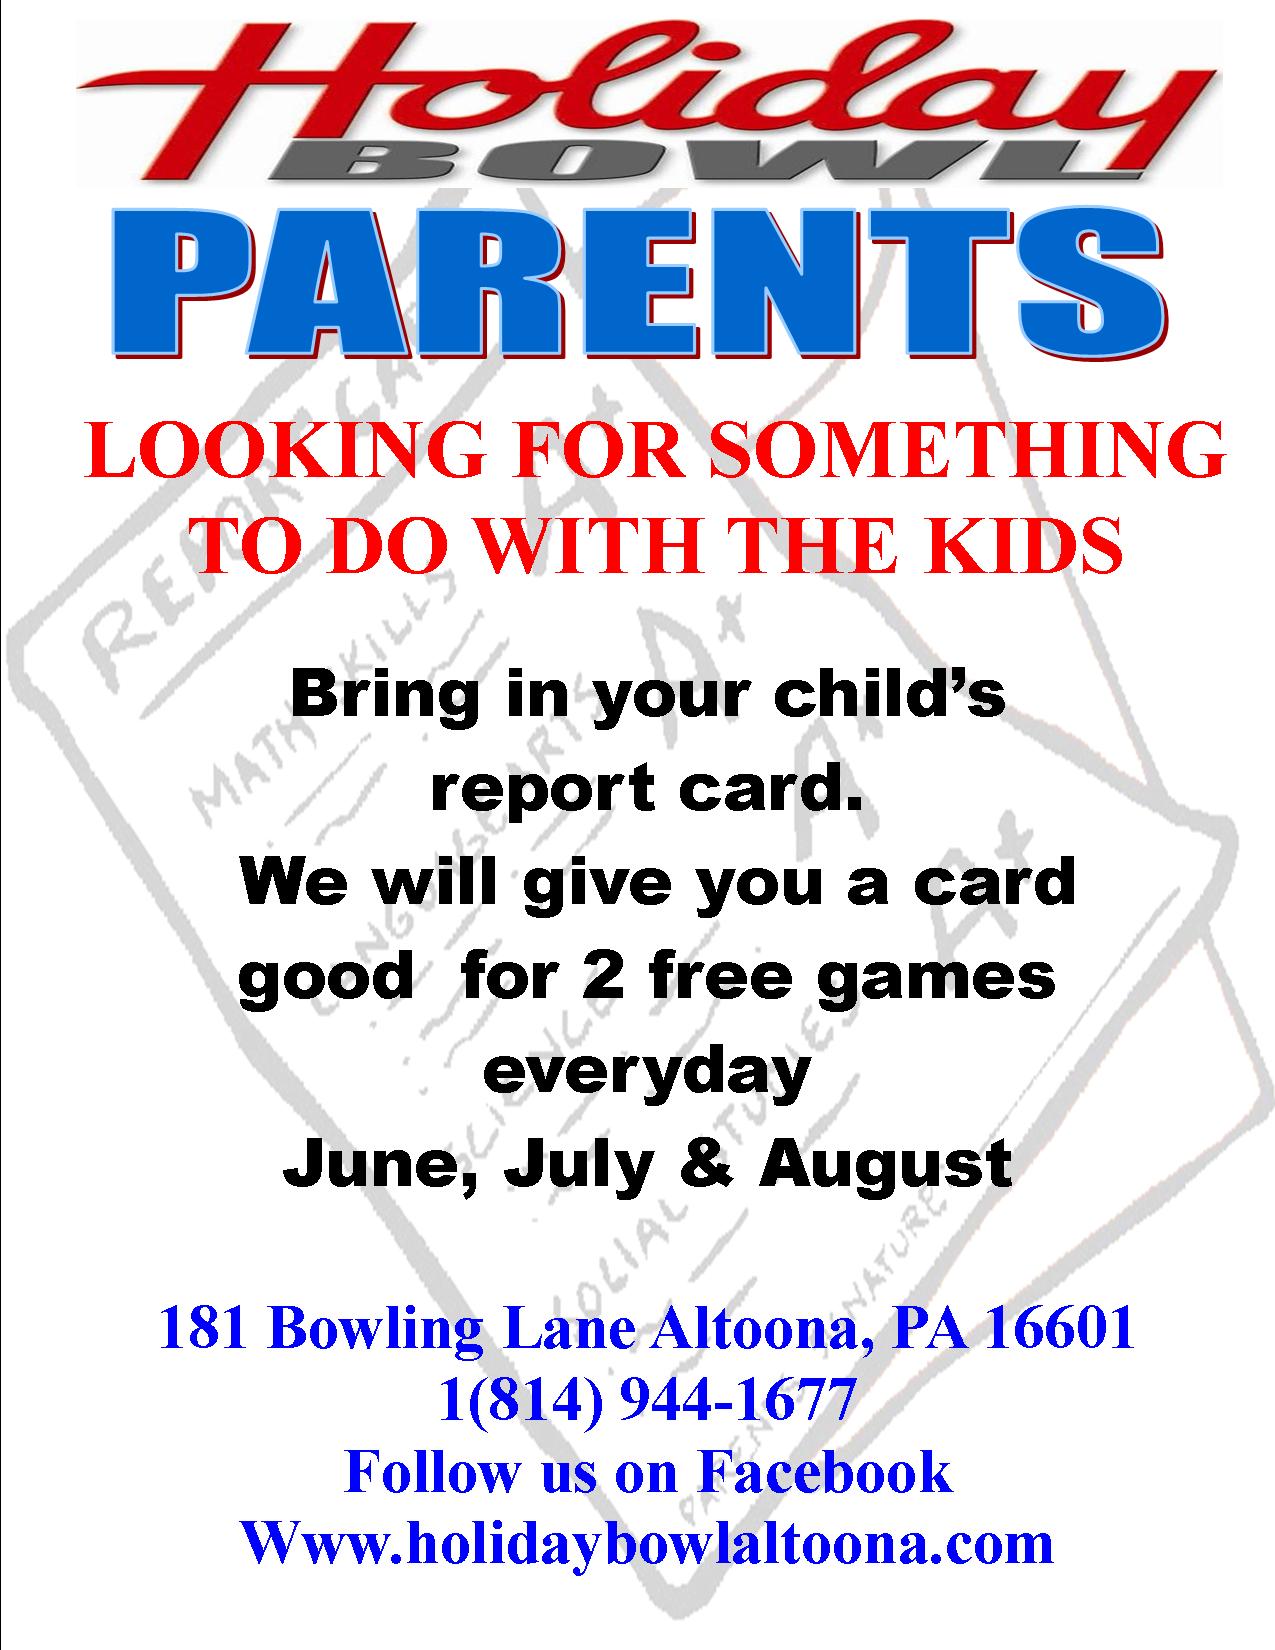 Holiday Bowl Altoona - Parents Looking For Something To Do With The Kids?